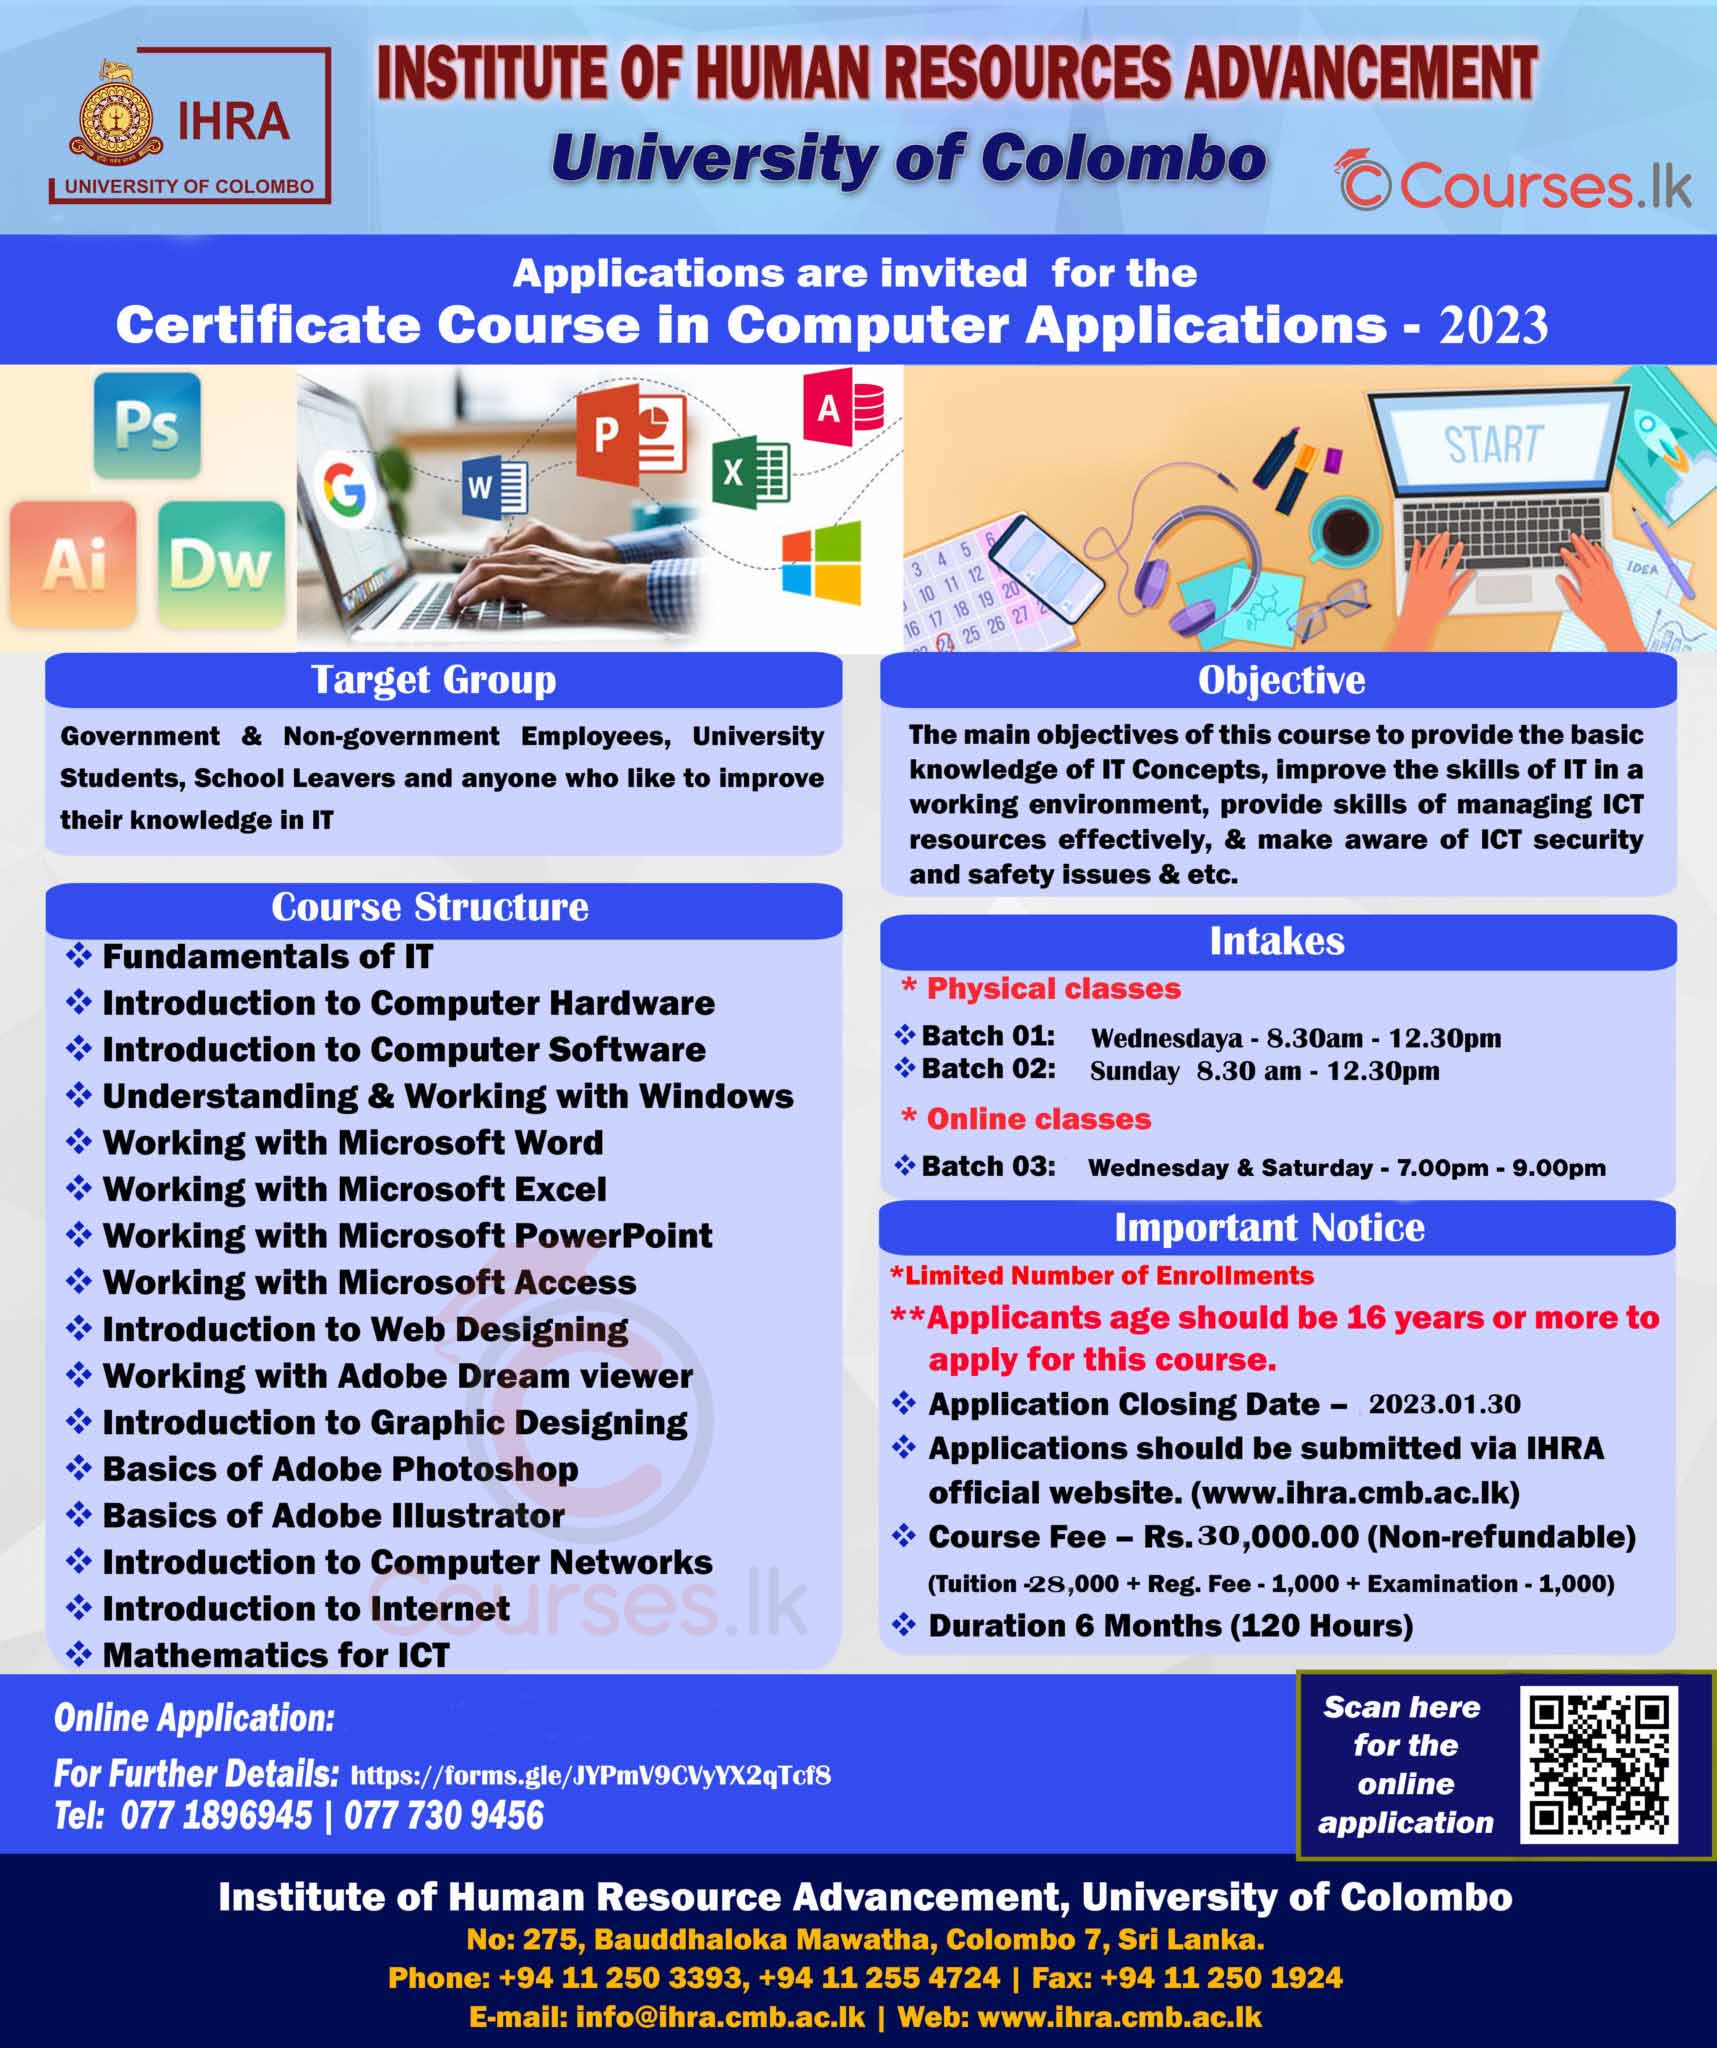 Certificate Course in Computer Applications 2023 - University of Colombo